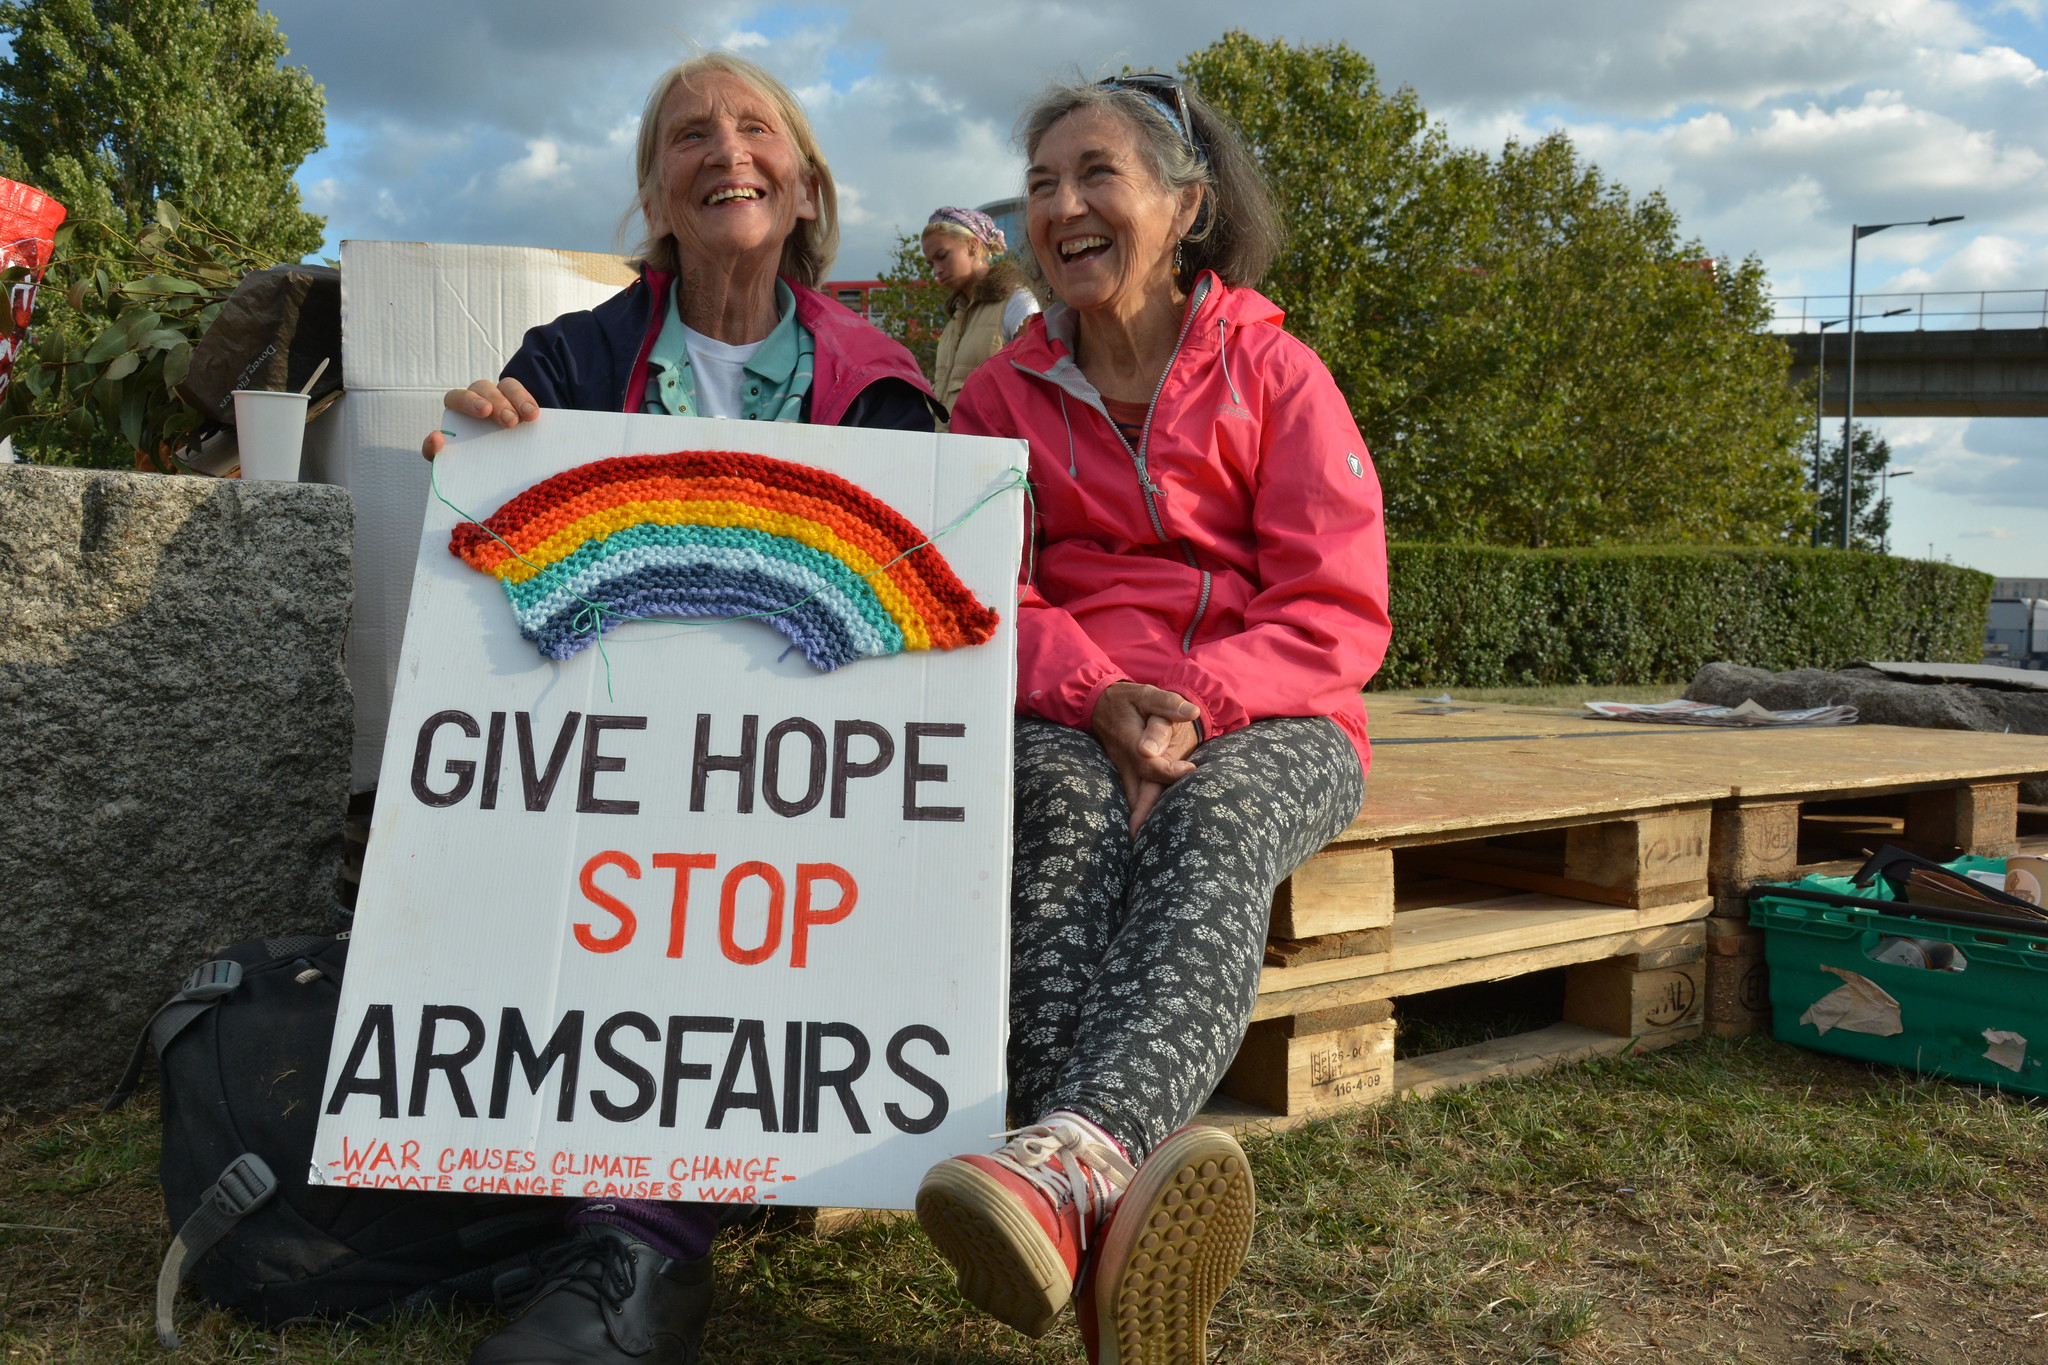 Give Hope Stop Arms Fairs sign with woven rainbow held by two campaigners, one wearing a pink jacket, the other wearing a black and pink jacket.